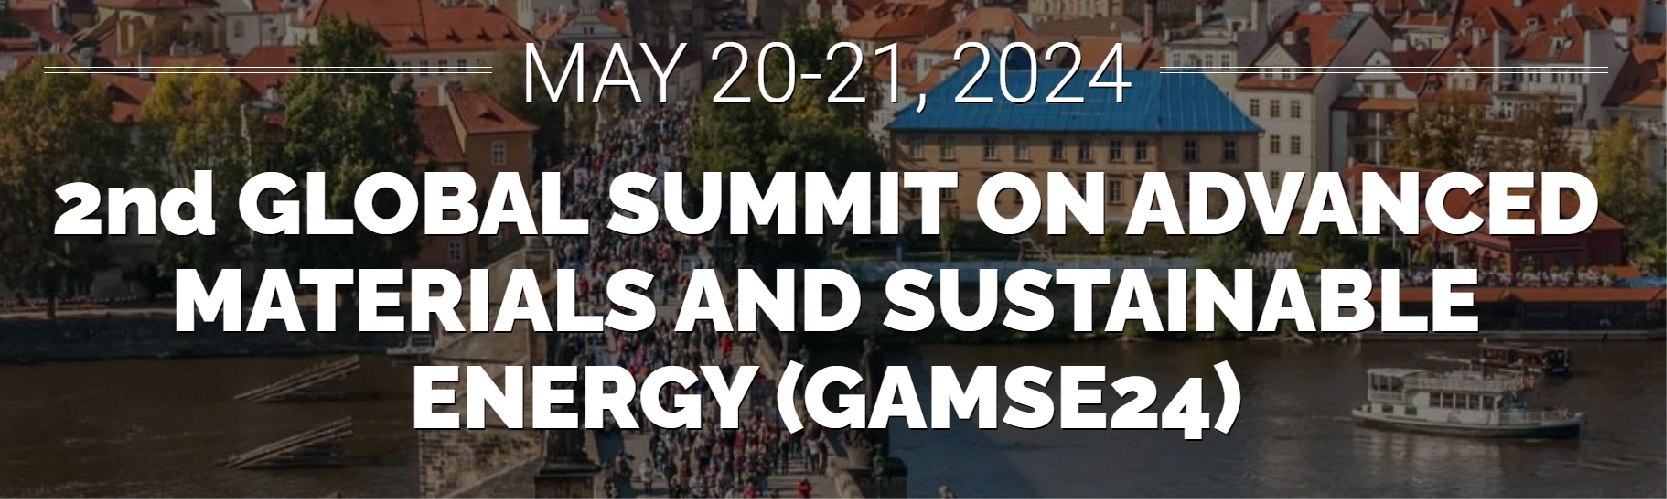 2nd Global Summit on Advanced Materials and Sustainable Energy - GAMSE24